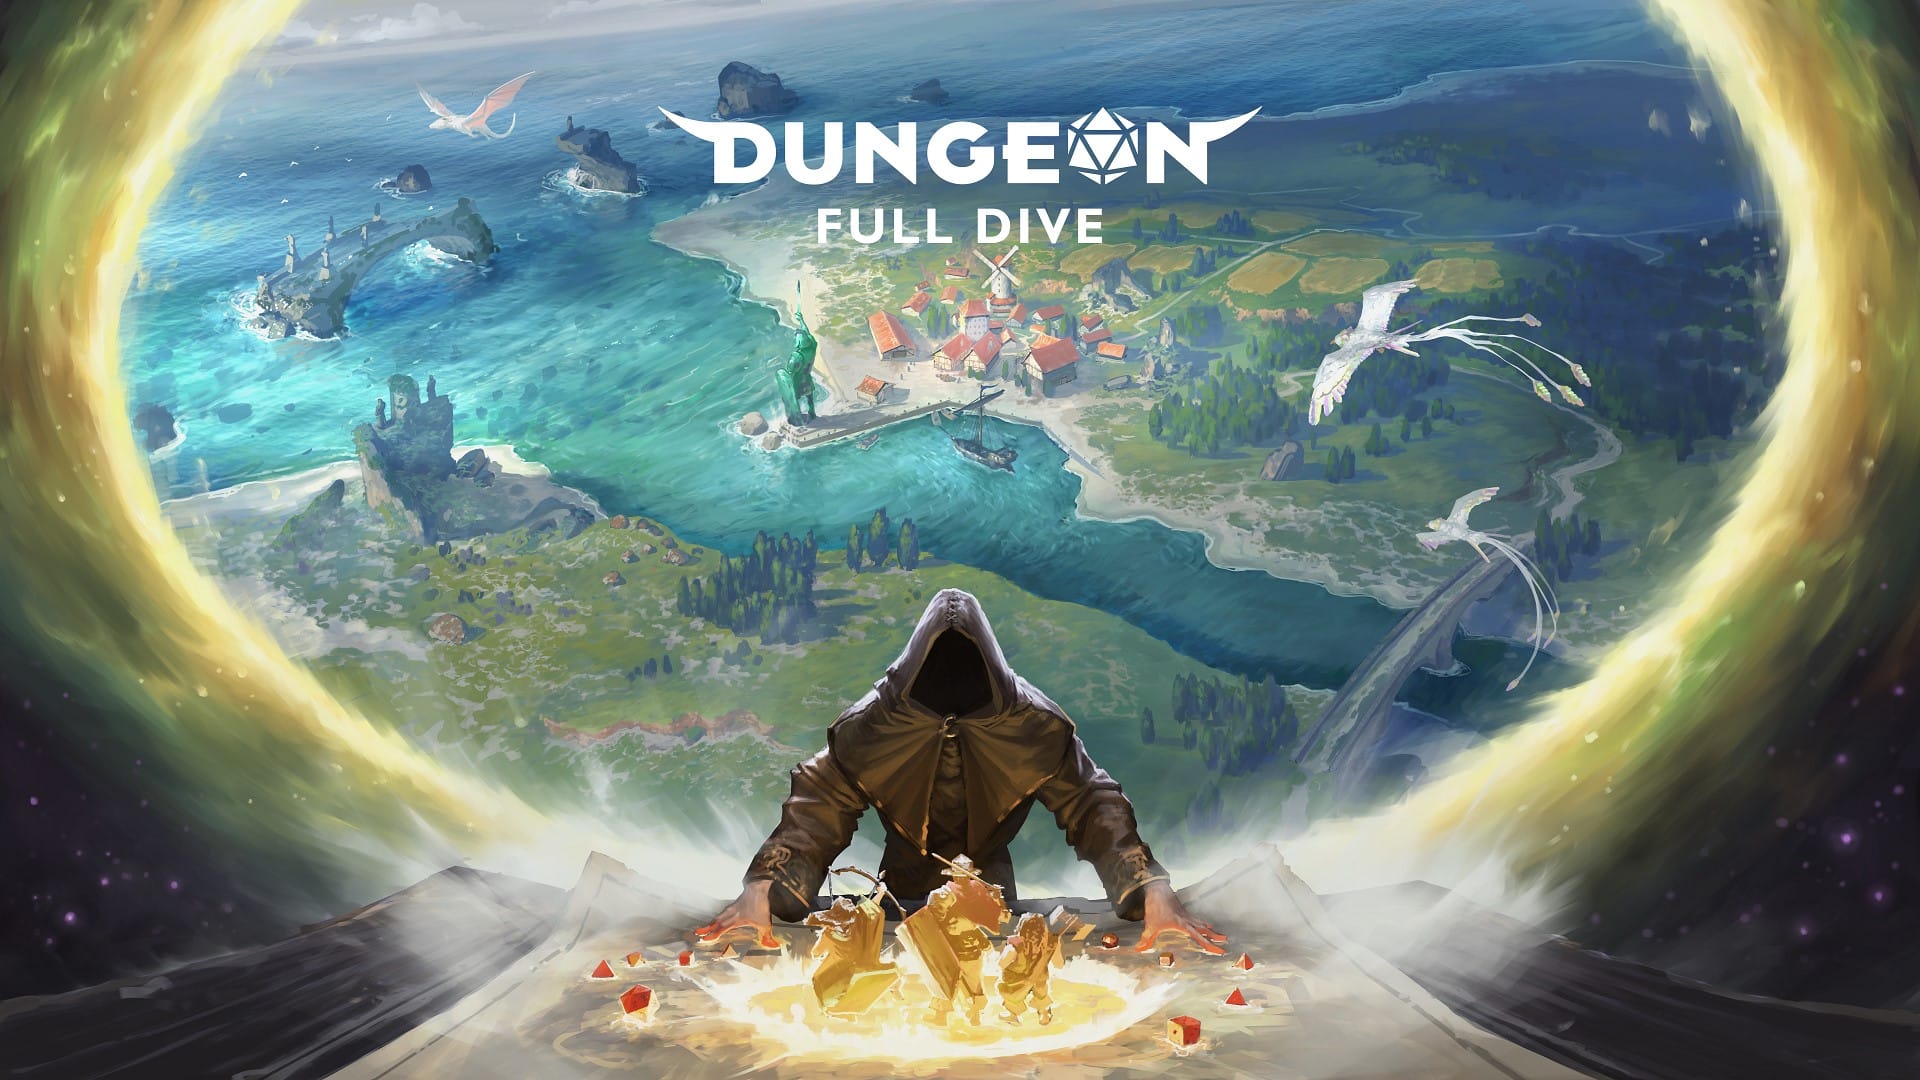 Dungeon Full Dive Brings D&D 5e To PC VR This October